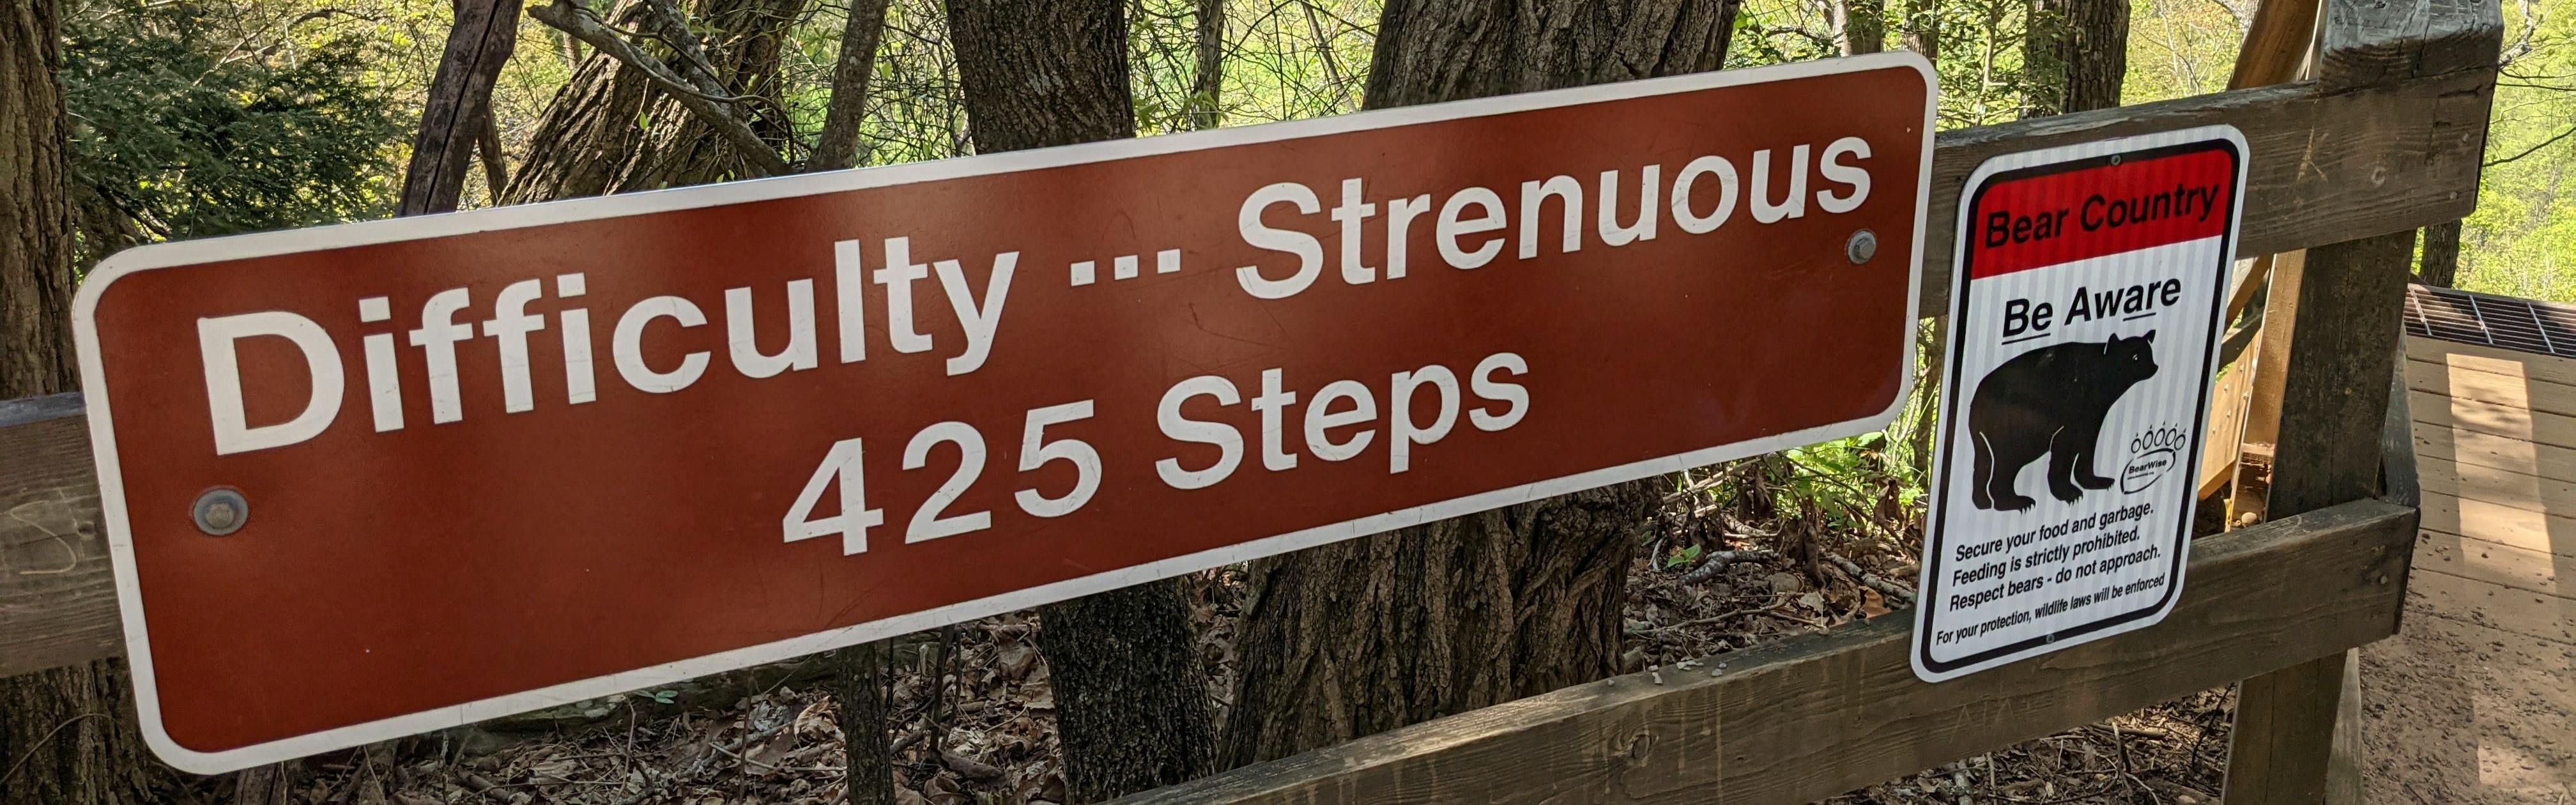 Sign found at the Approach Trail at Amicalola Falls State Park, GA that reads "Difficulty...Strenuous 425 Steps."